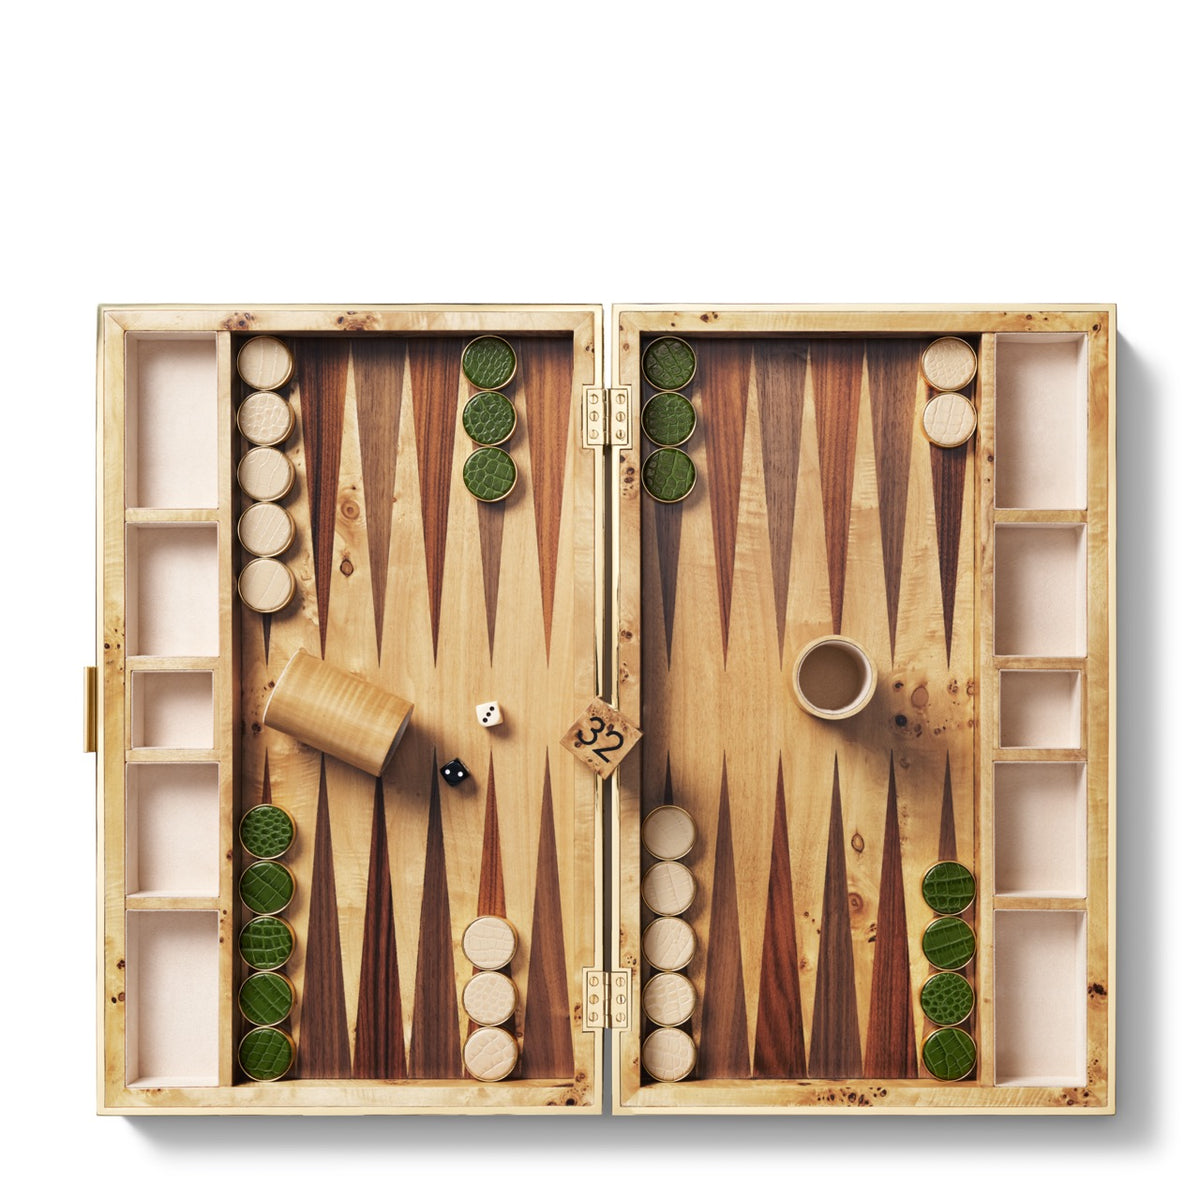 Croc Leather Backgammon Set with Dice